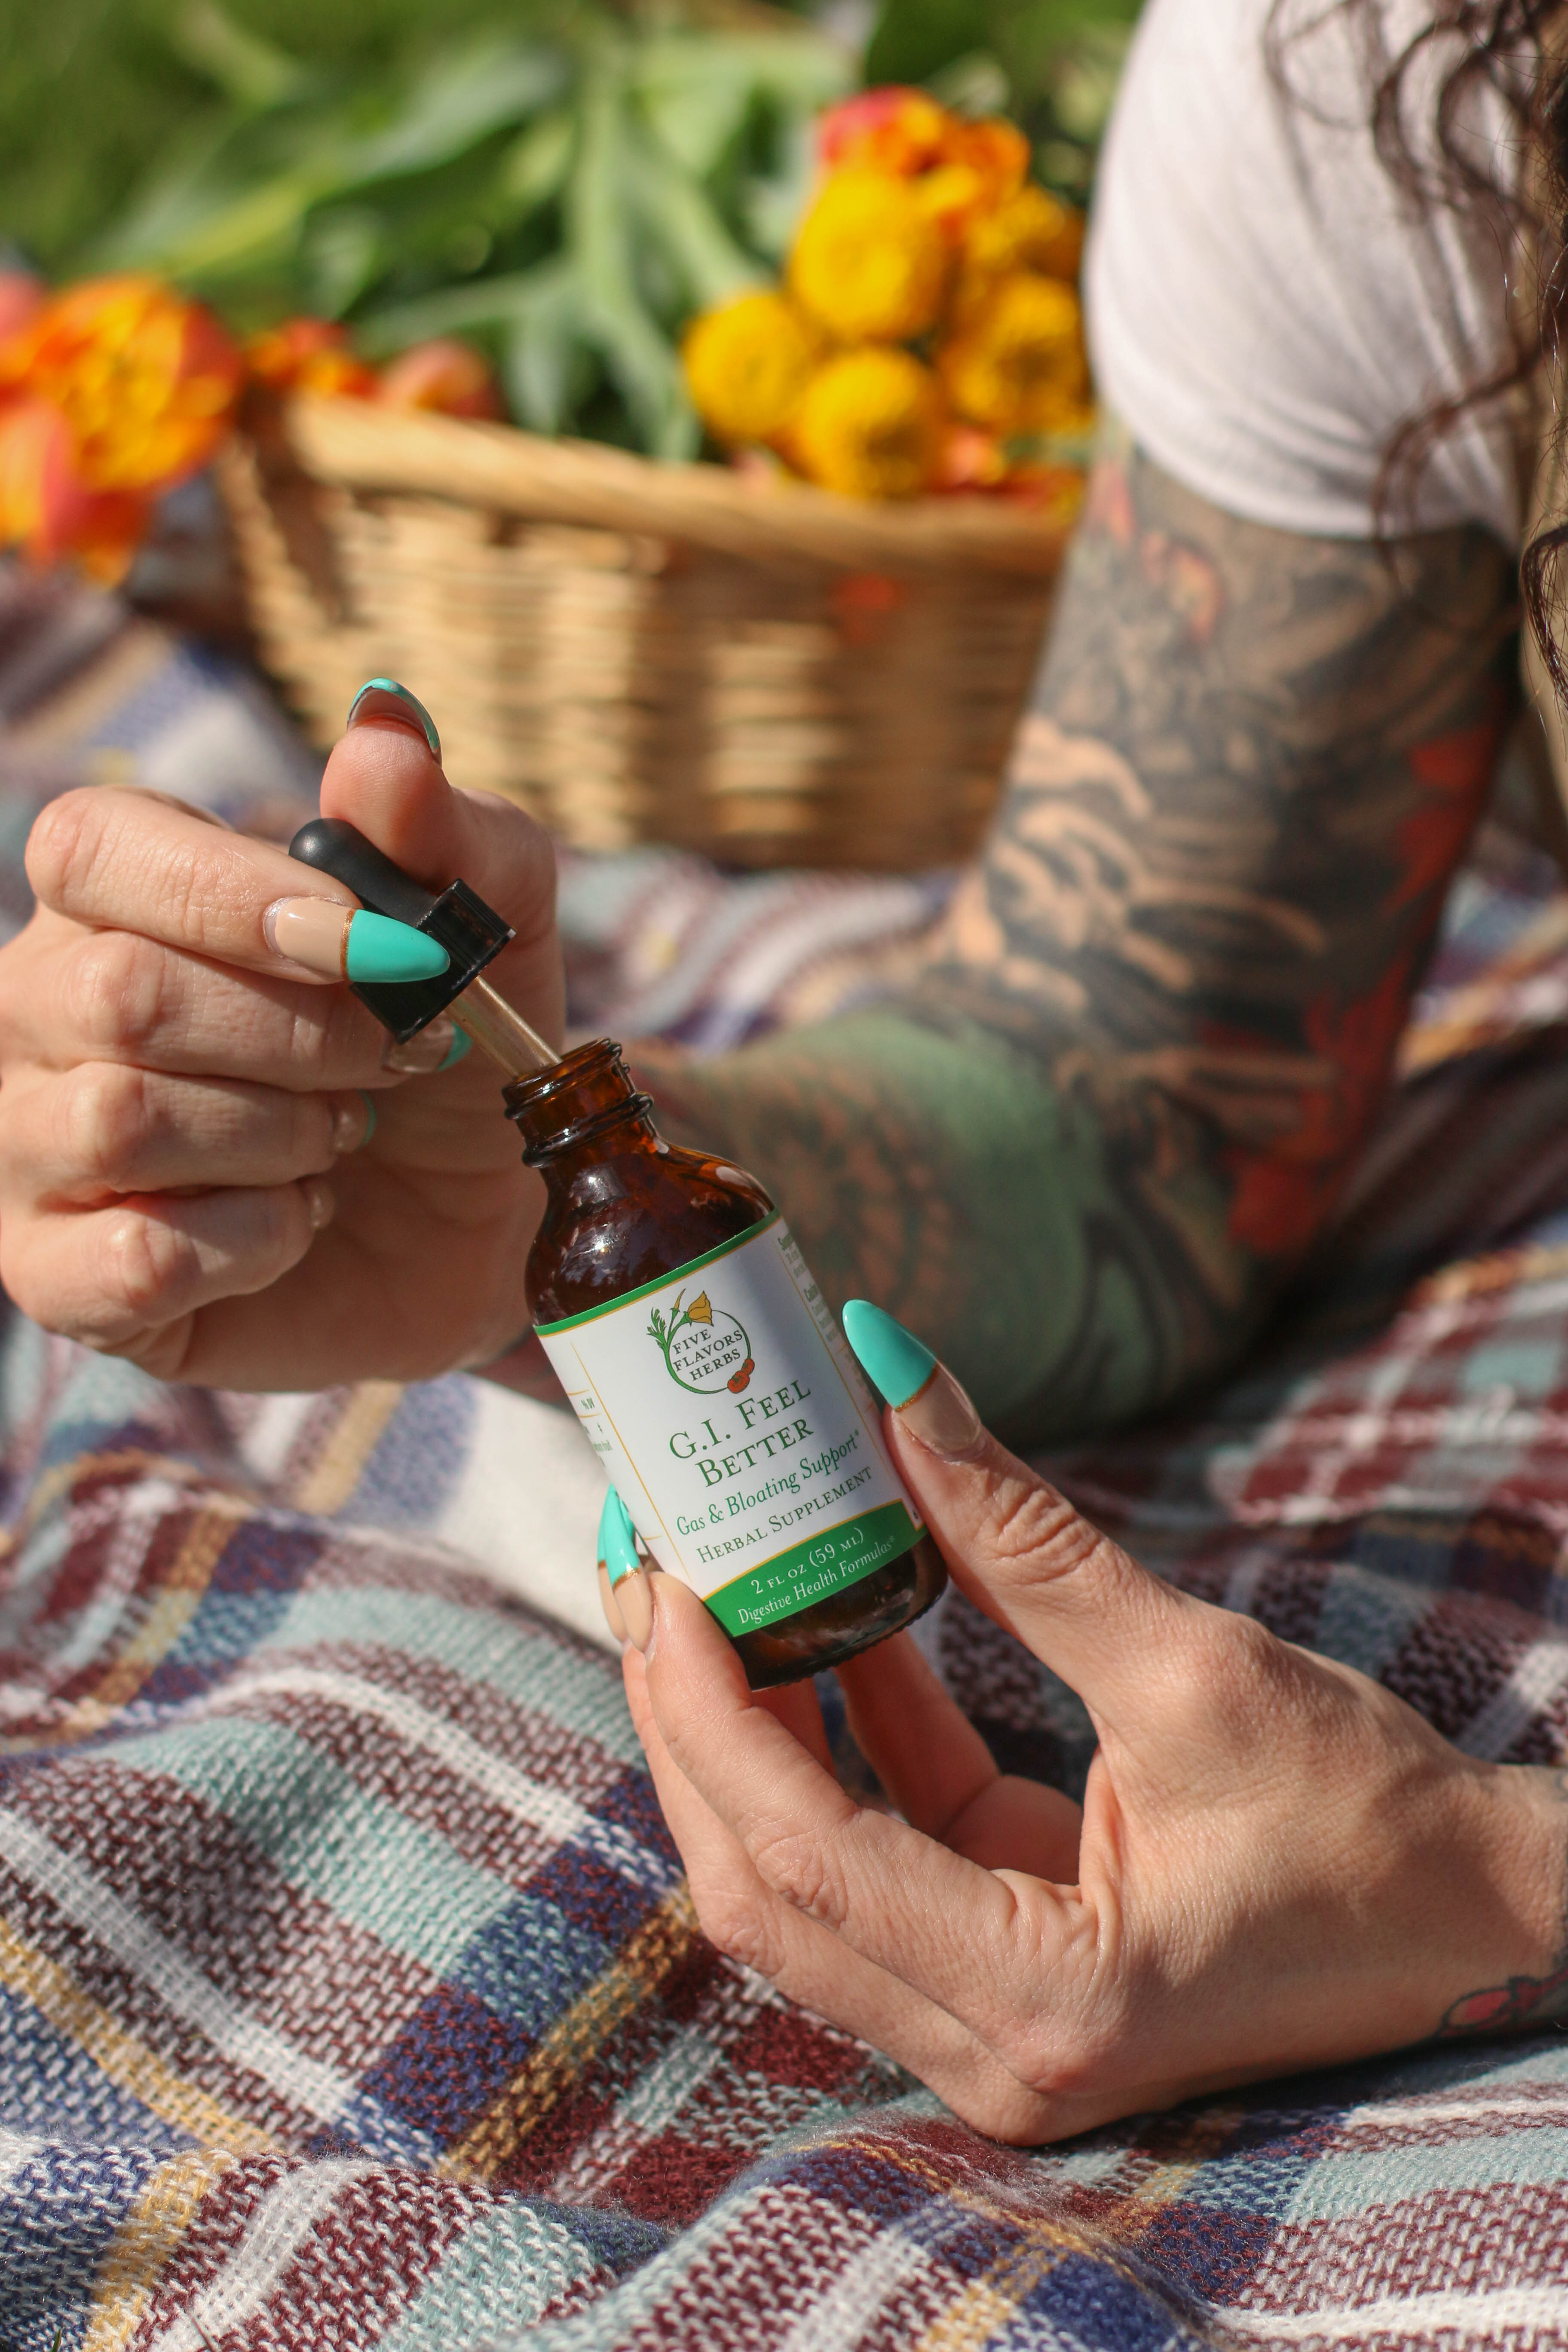 woman-with-long-painted-finger-nails-and-arm-sleeves-of-floral-tattoos-sitting-outside-on-picnic-blanket-holding-open-dropper-bottle-of-gi-feel-better-tincture-for-liver-health-and-digestion